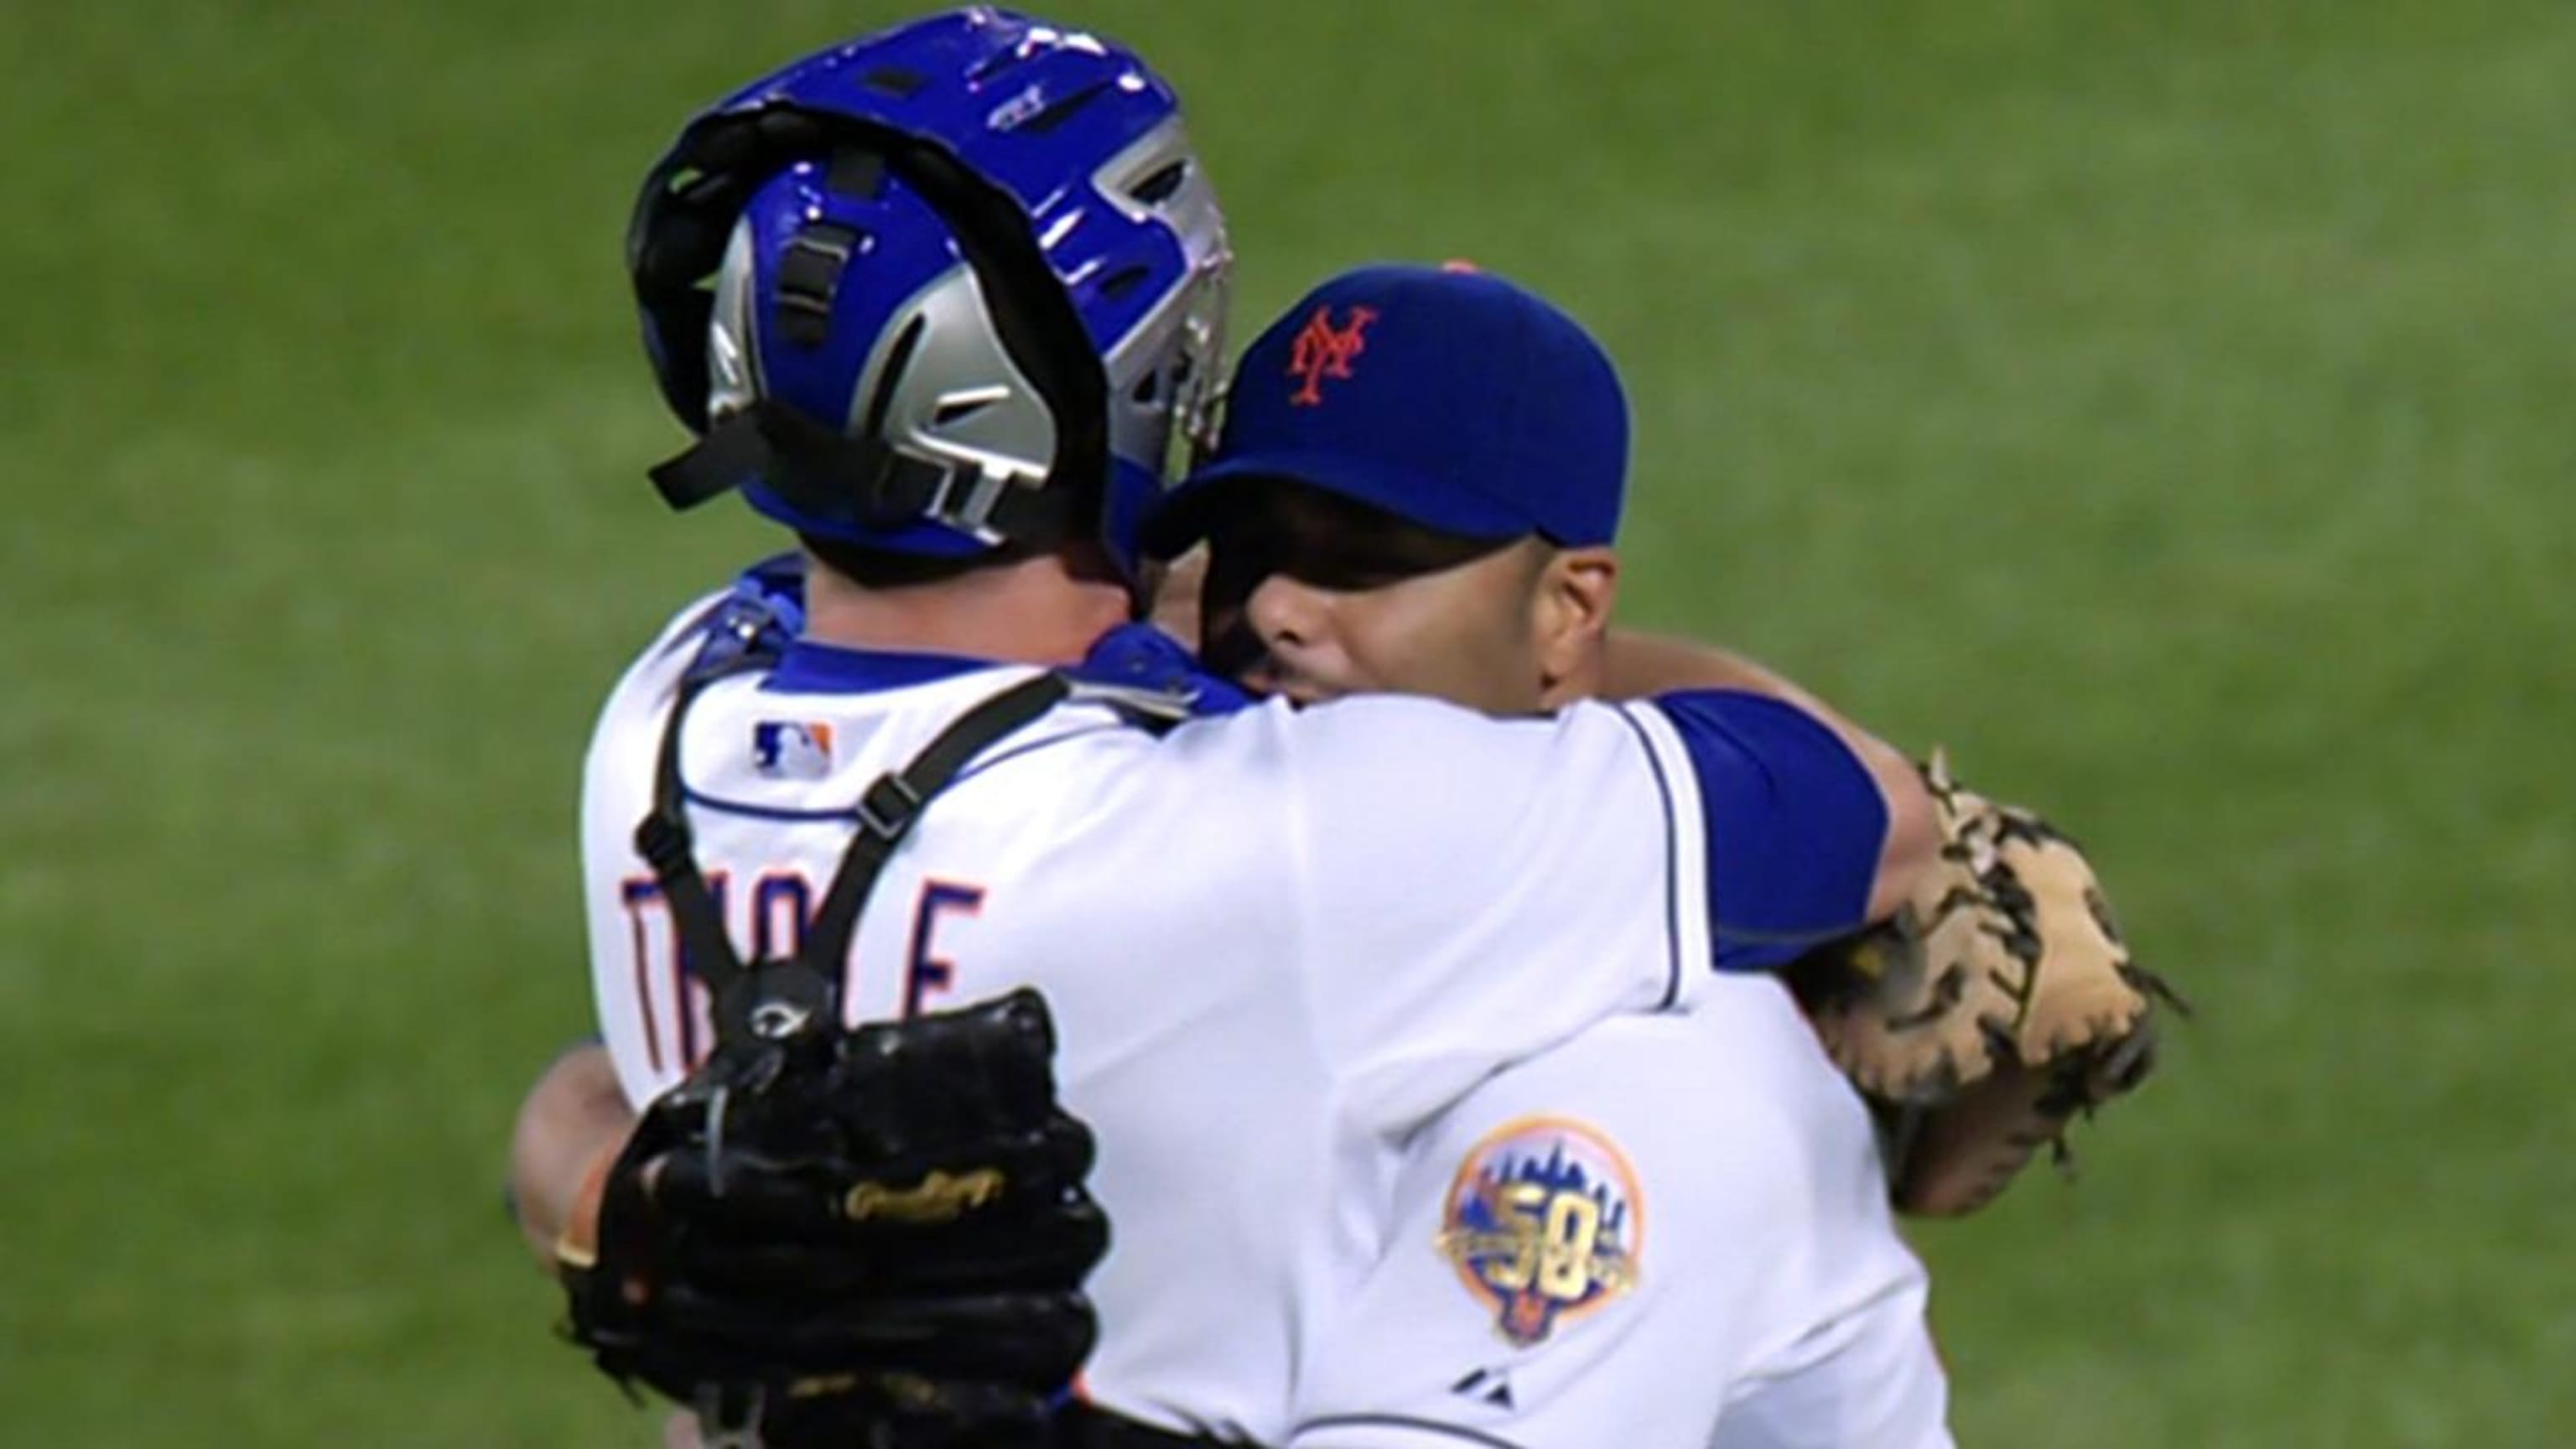 You've probably never heard the story of the best pitching performance in  Mets history